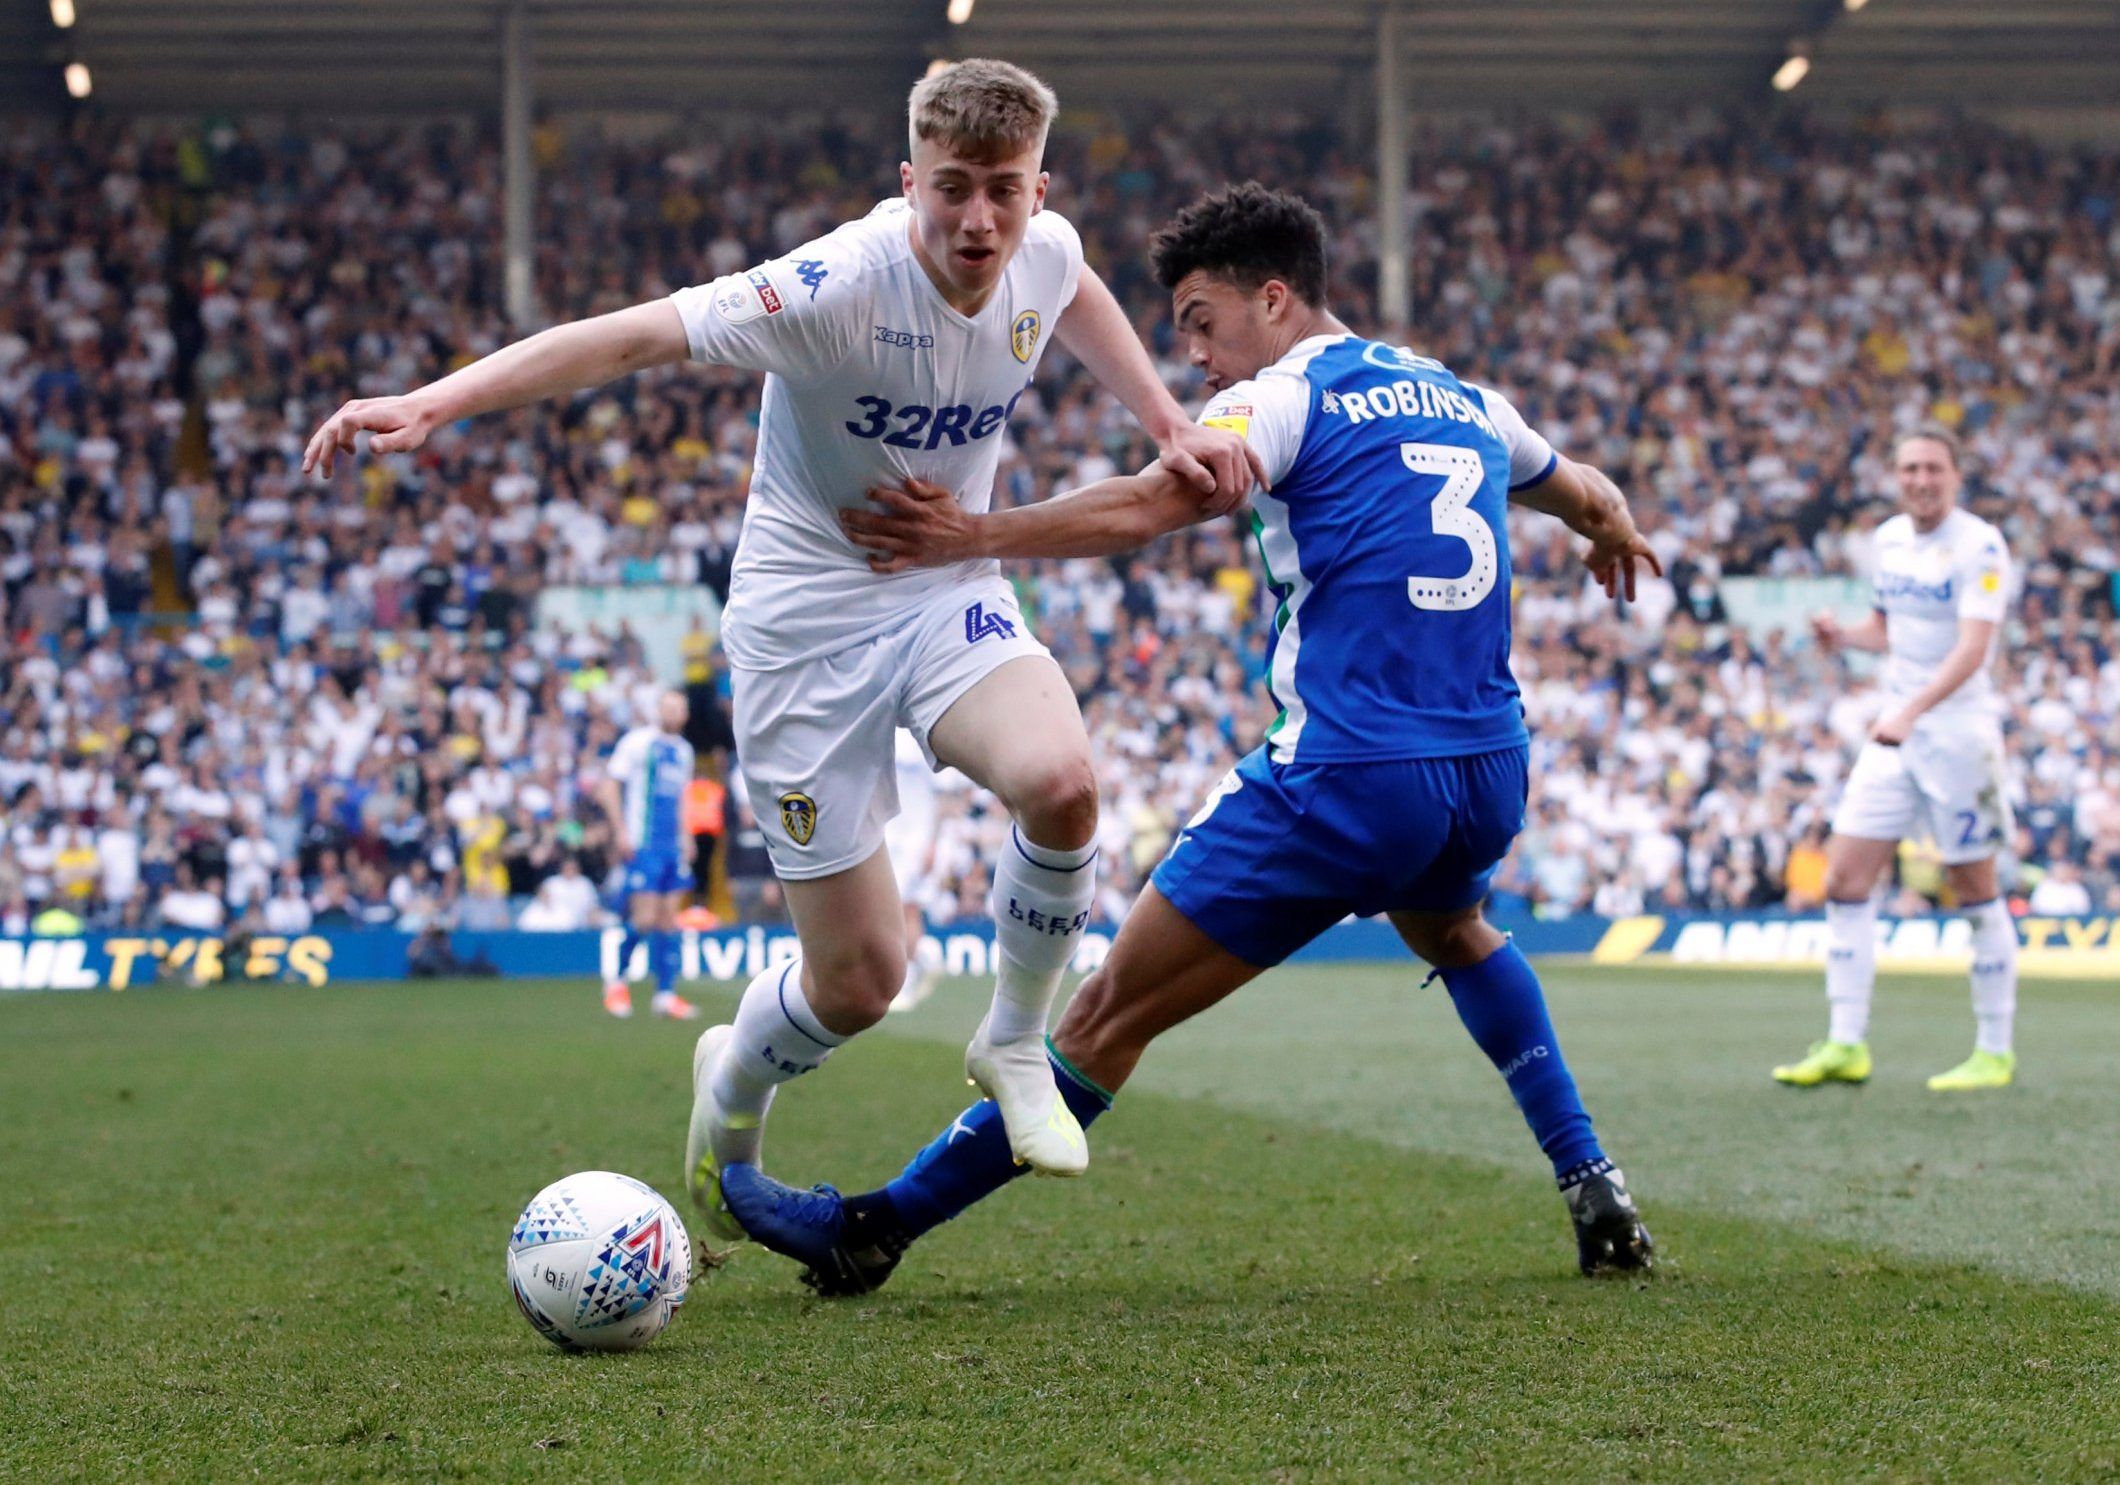 Leeds winger Jack Clarke in action against Wigan in the Championship